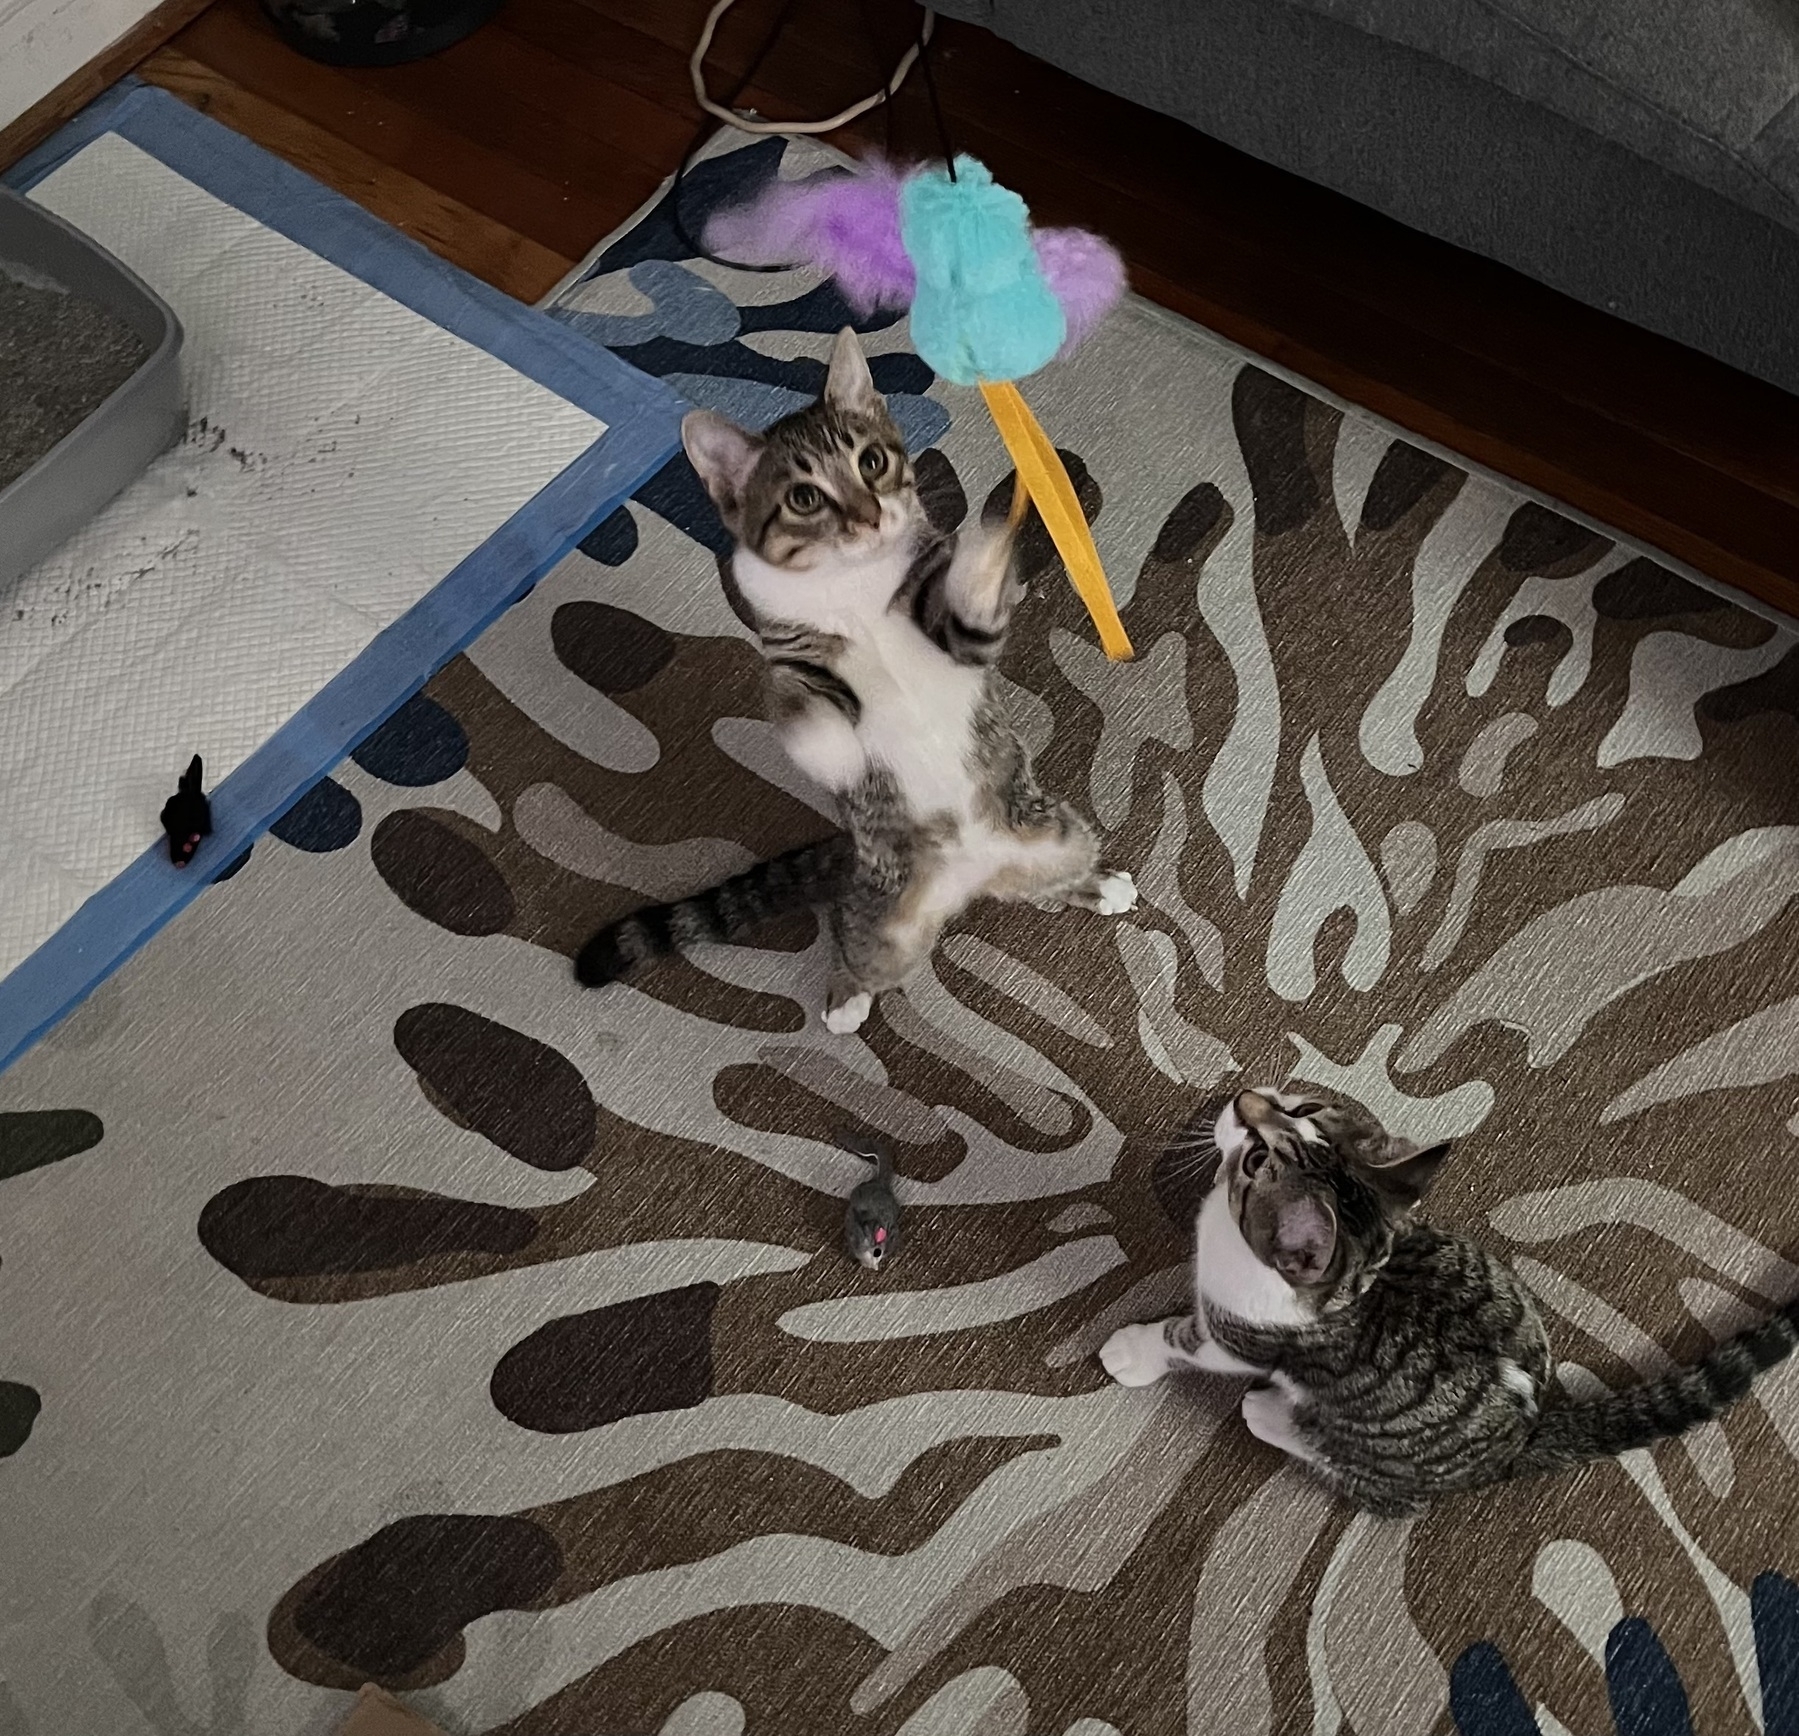 Two kittens play with a cat toy. One is mid-air, trying to grab it. The other is on the ground waiting to pounce.